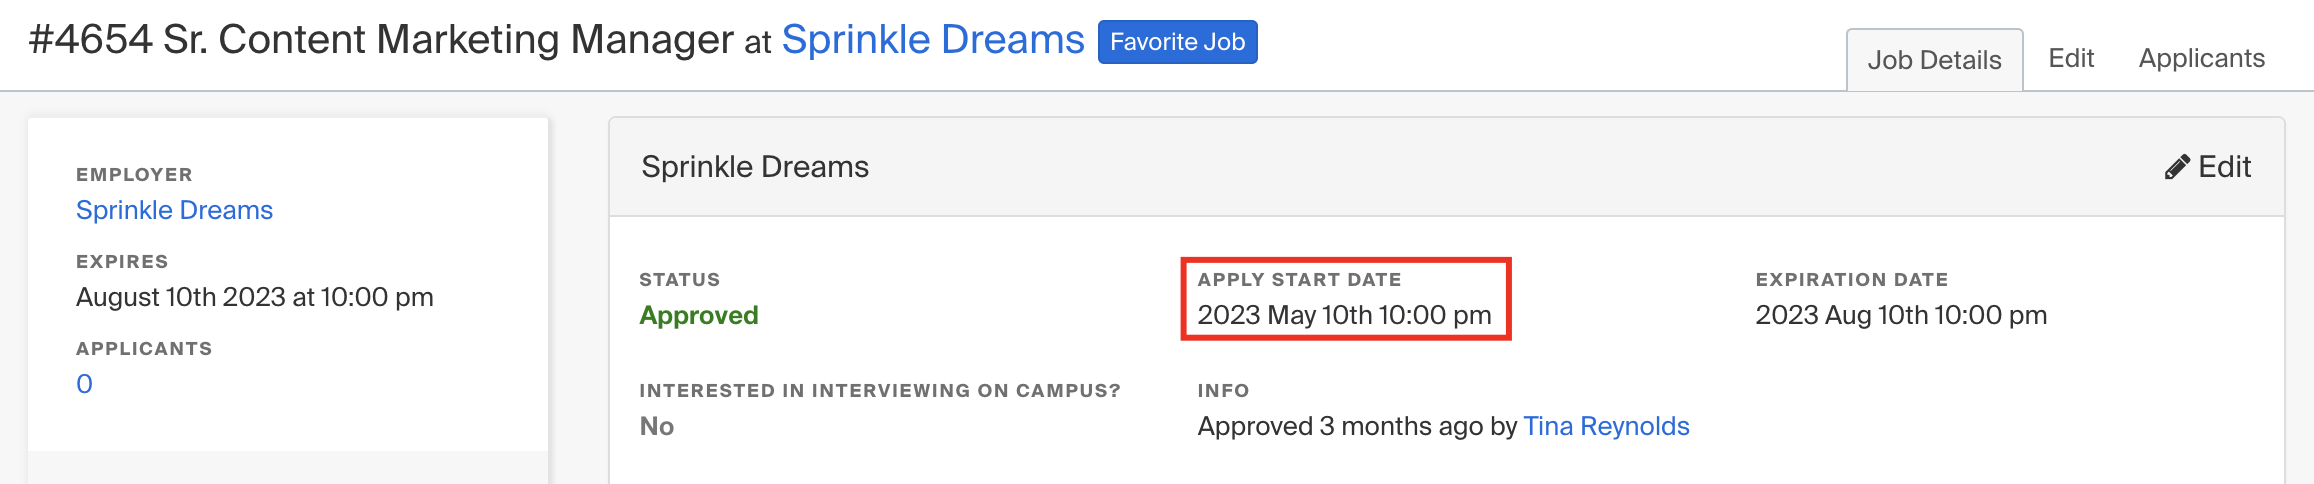 Apply Start Date on Job Details page.png